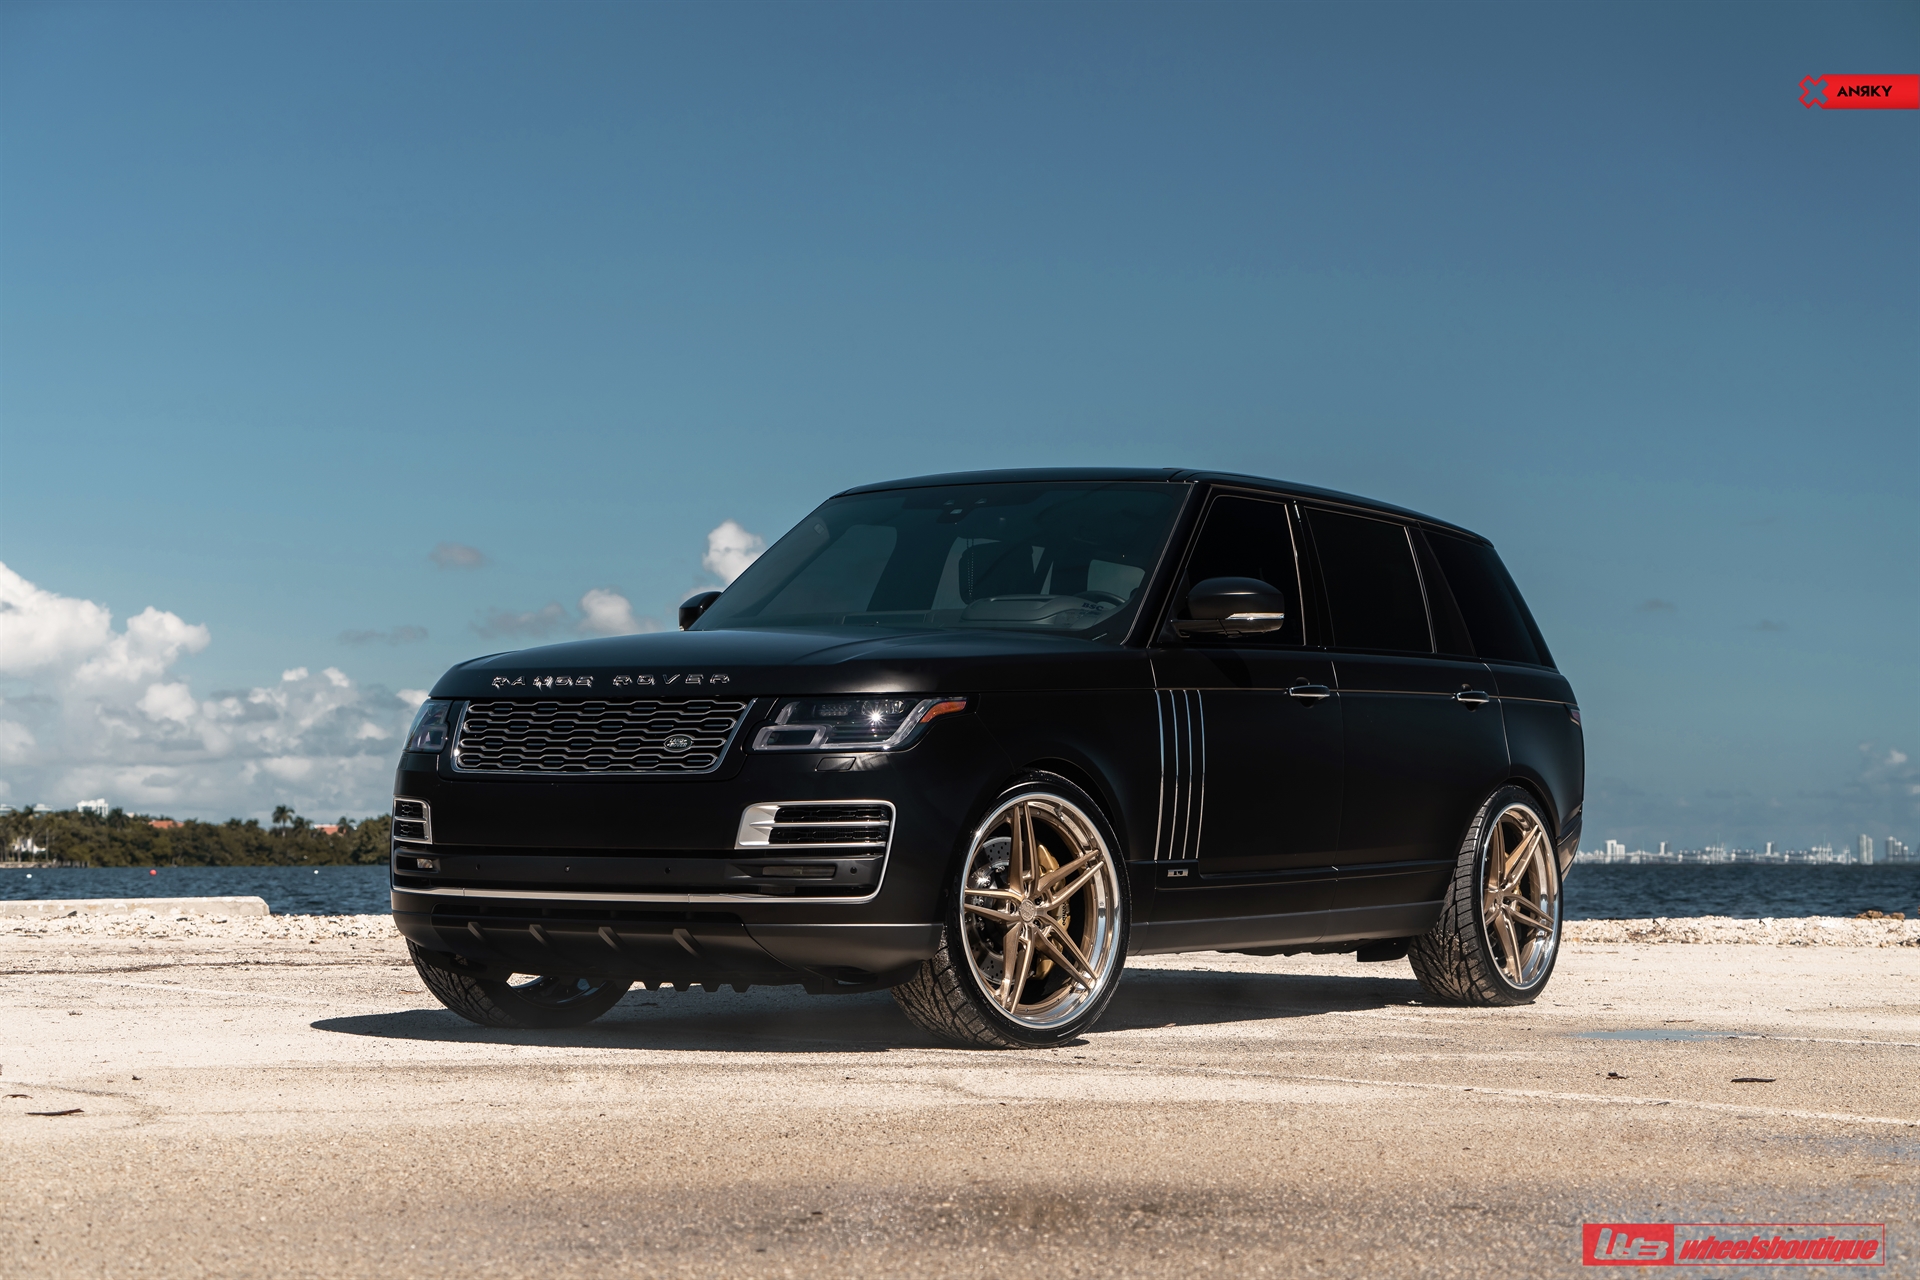 Land Rover Range Rover LWB Autobiography on ANRKY AN37 Gallery Wheels